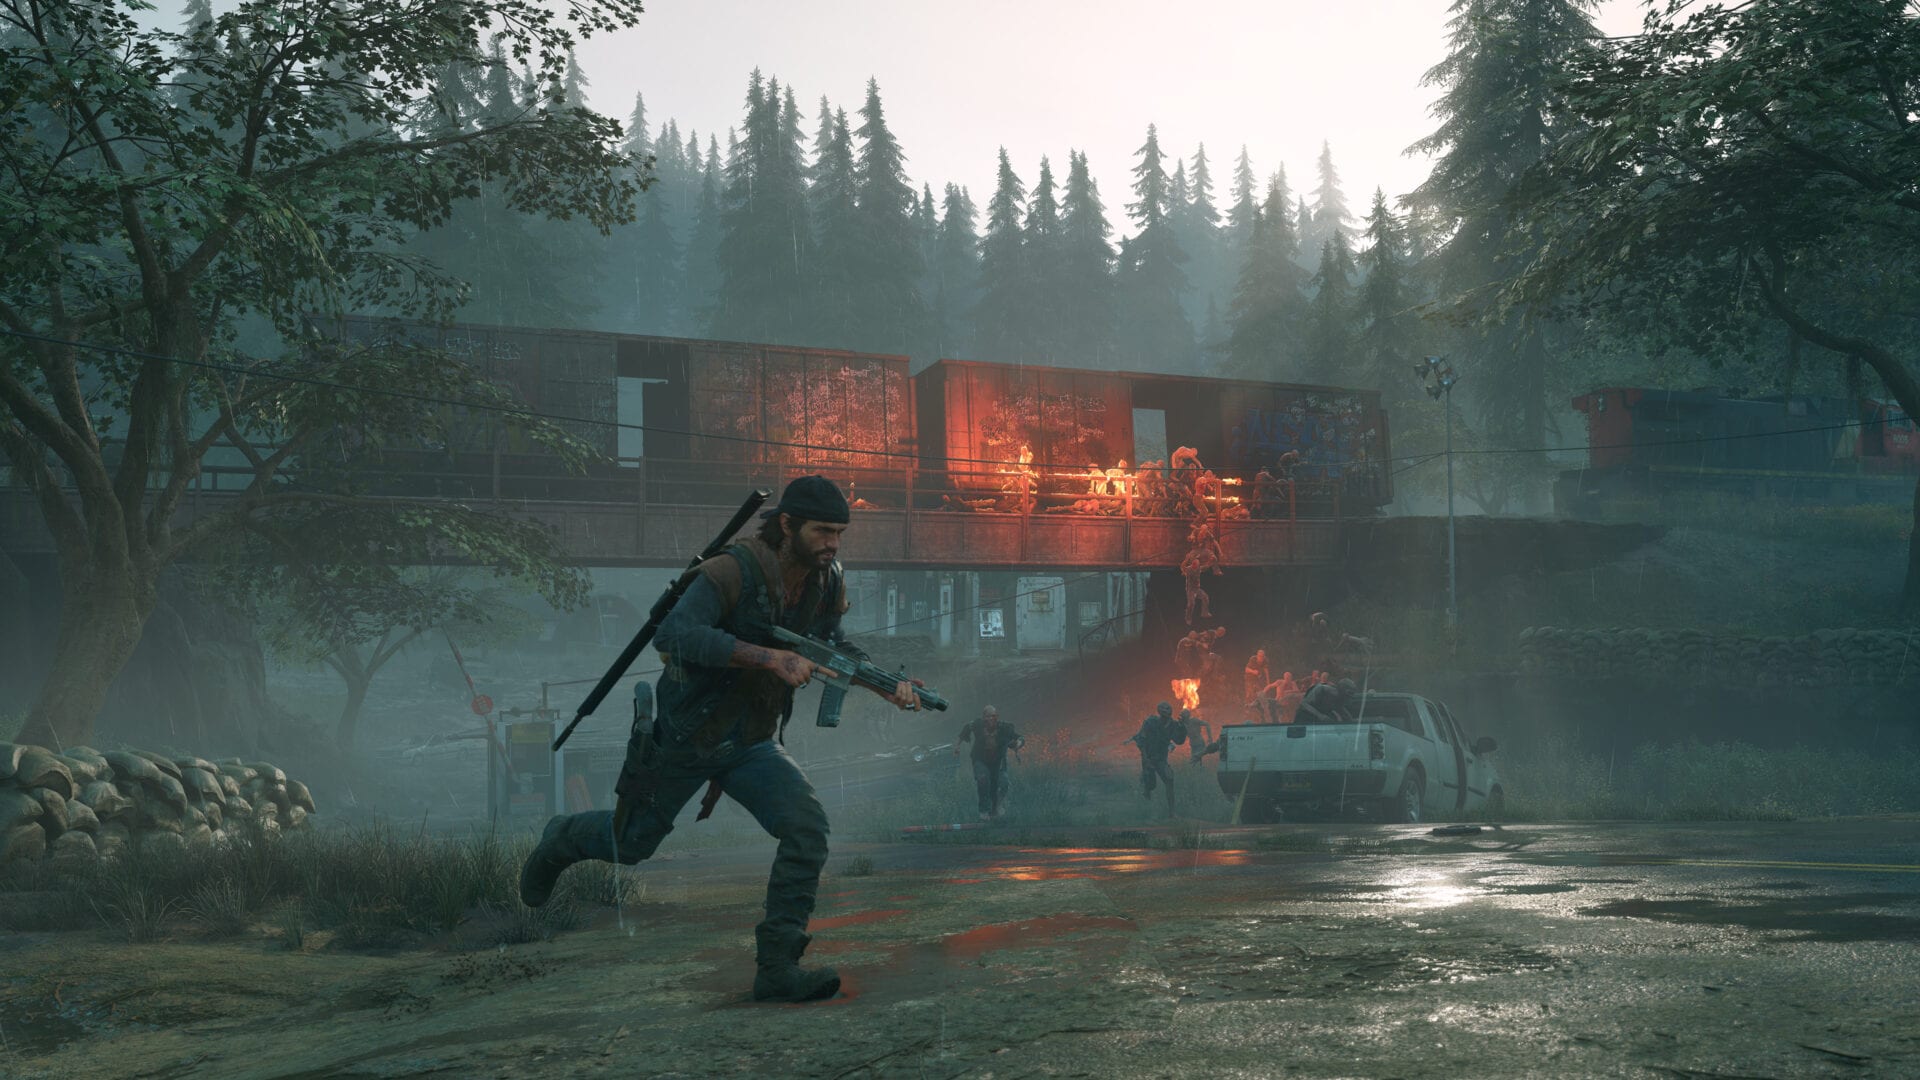 Days Gone Steam Page Reveals System Requirements & Visual Improvements